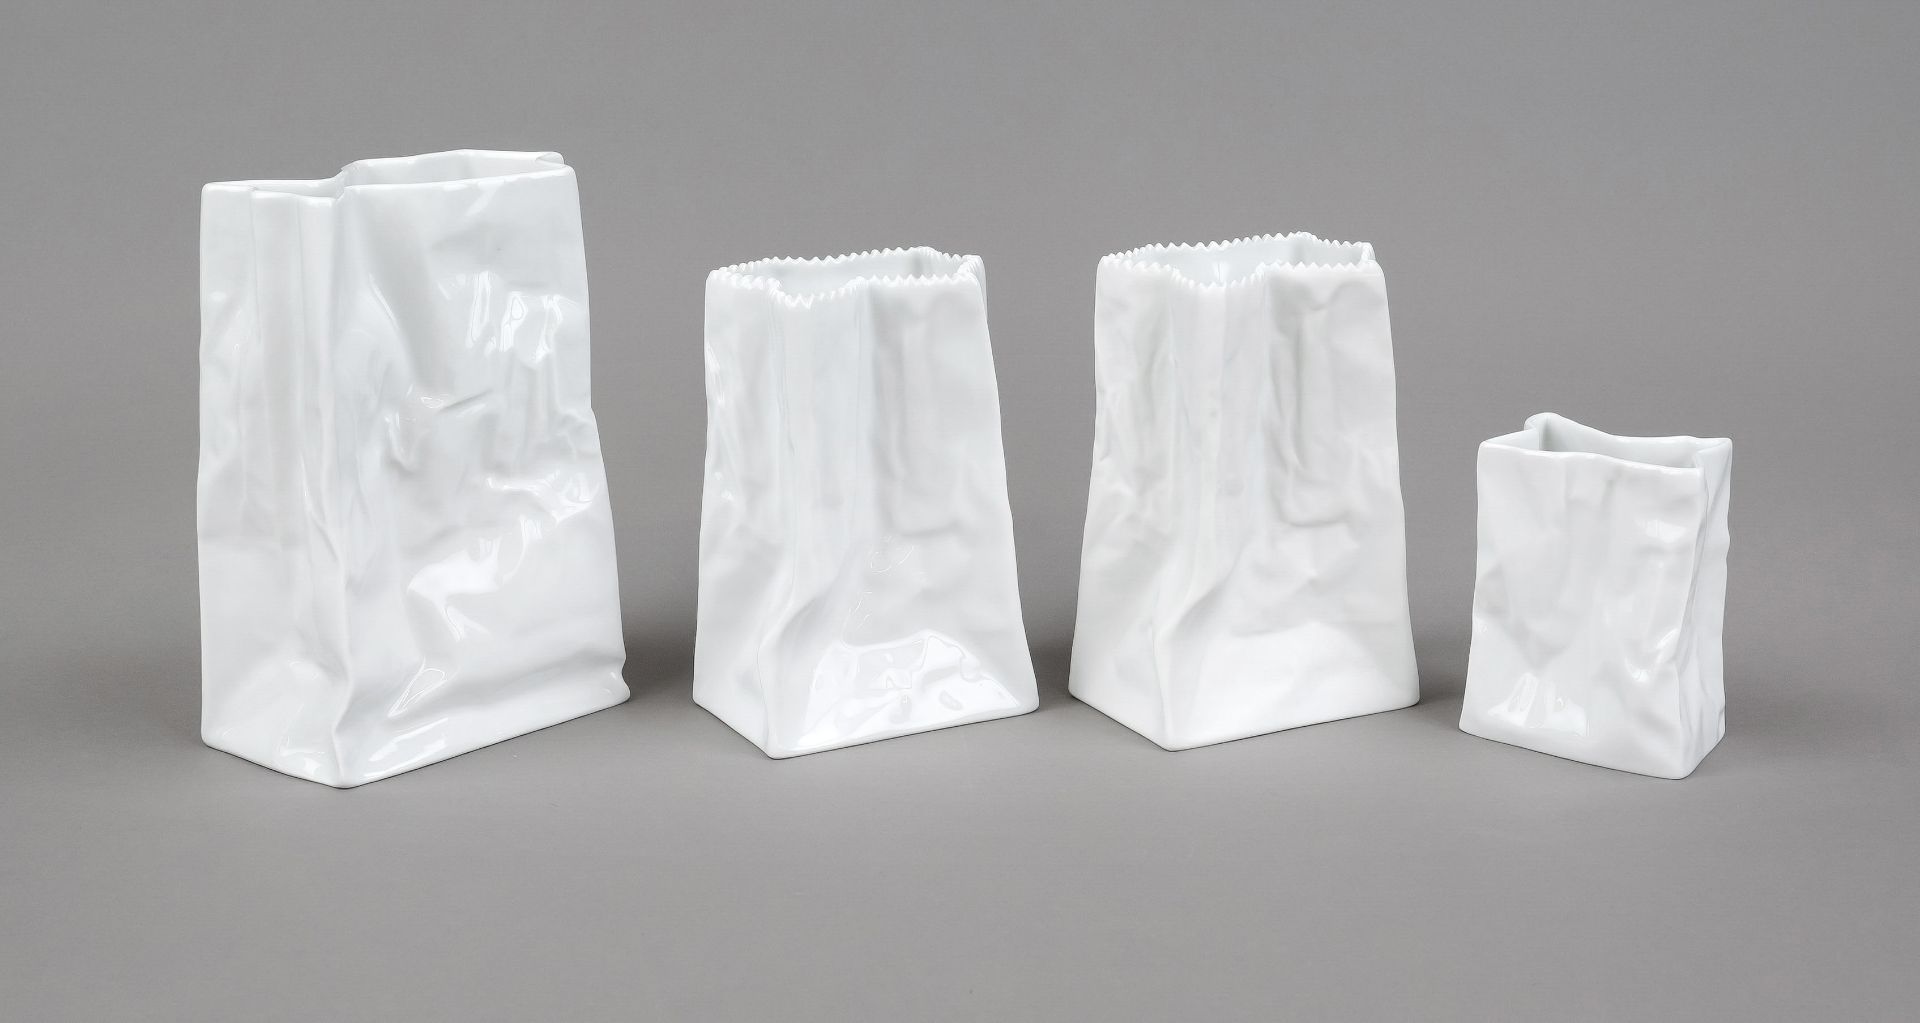 Four cone vases, Rosenthal, 3x studio line, late 20th century, 1x do not litter collection, 21st